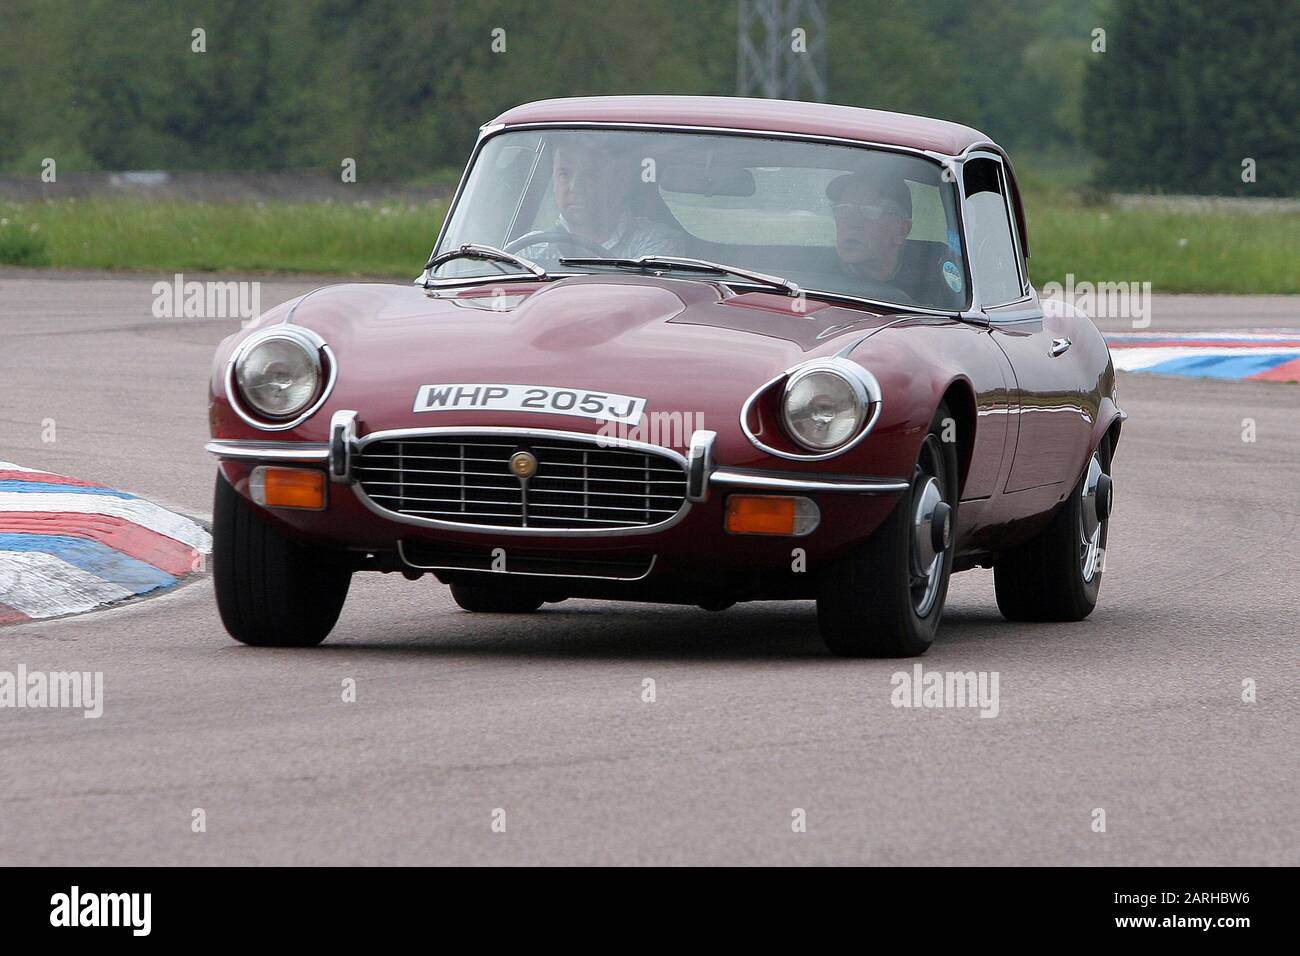 Early 1970s  Jaguar E Type Series 2  2+2  Coupe at Thruxton Circuit, Hampshire in 2006. Stock Photo